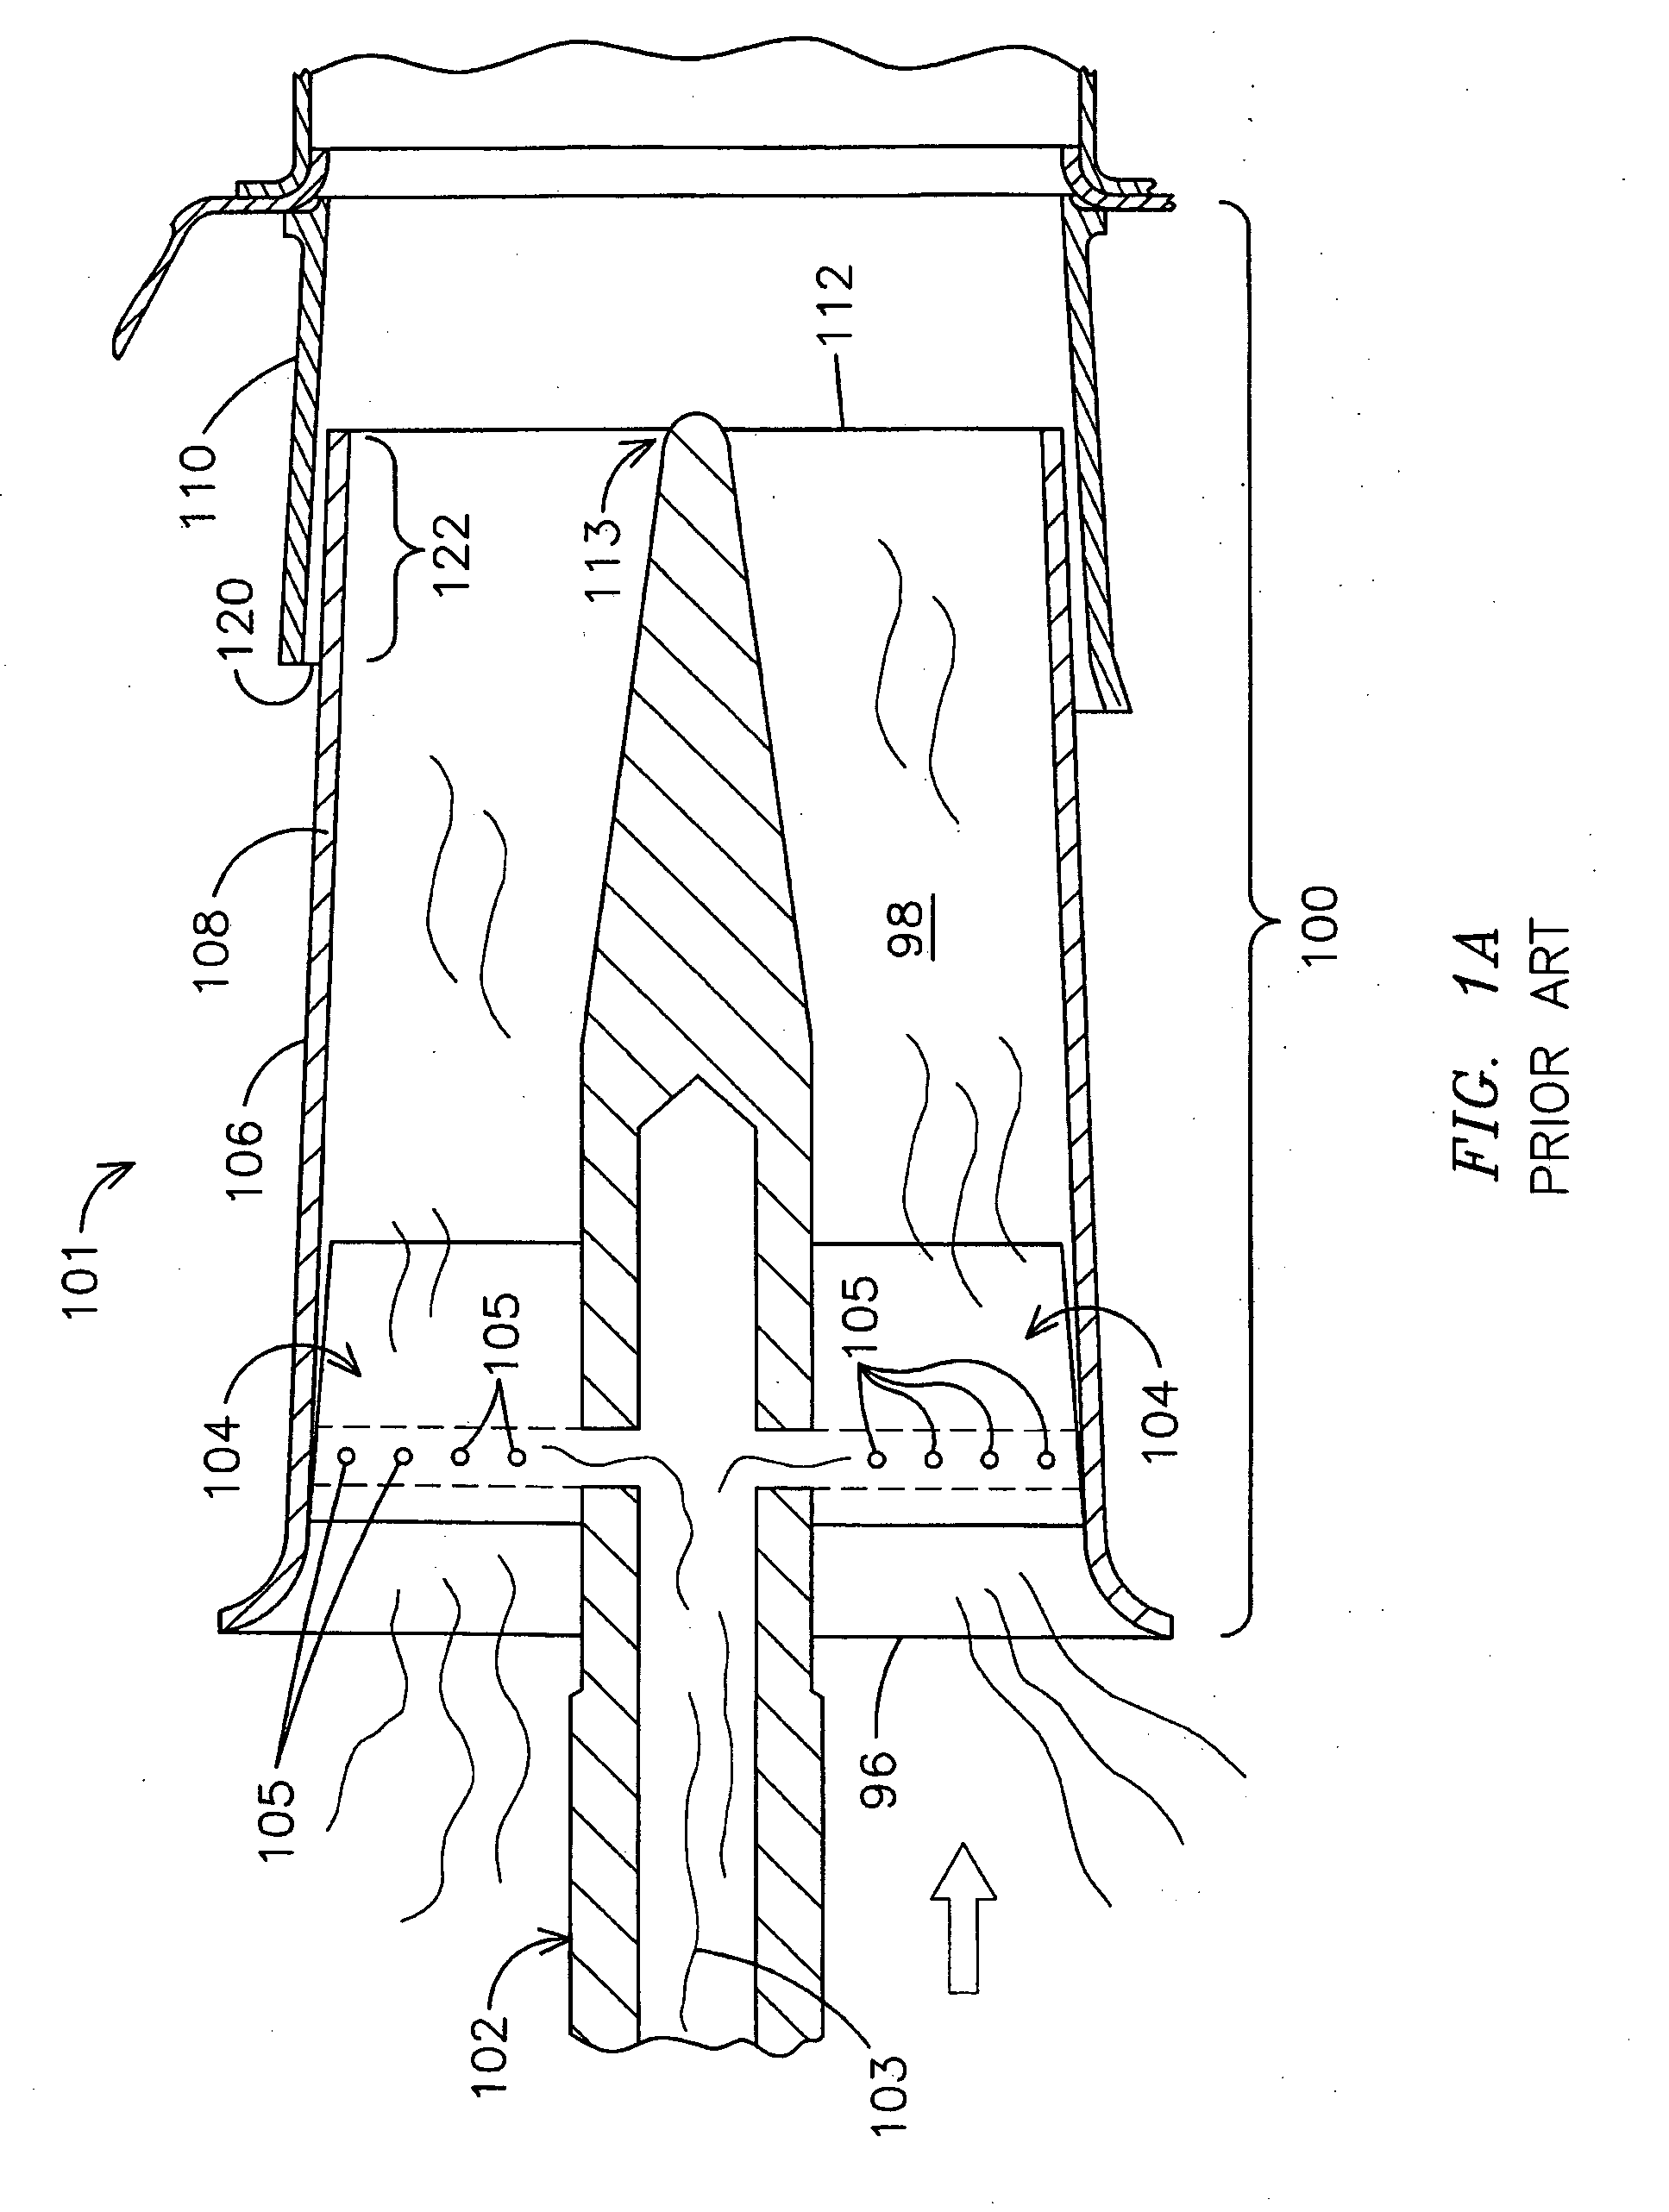 Extended flashback annulus in a gas turbine combustor